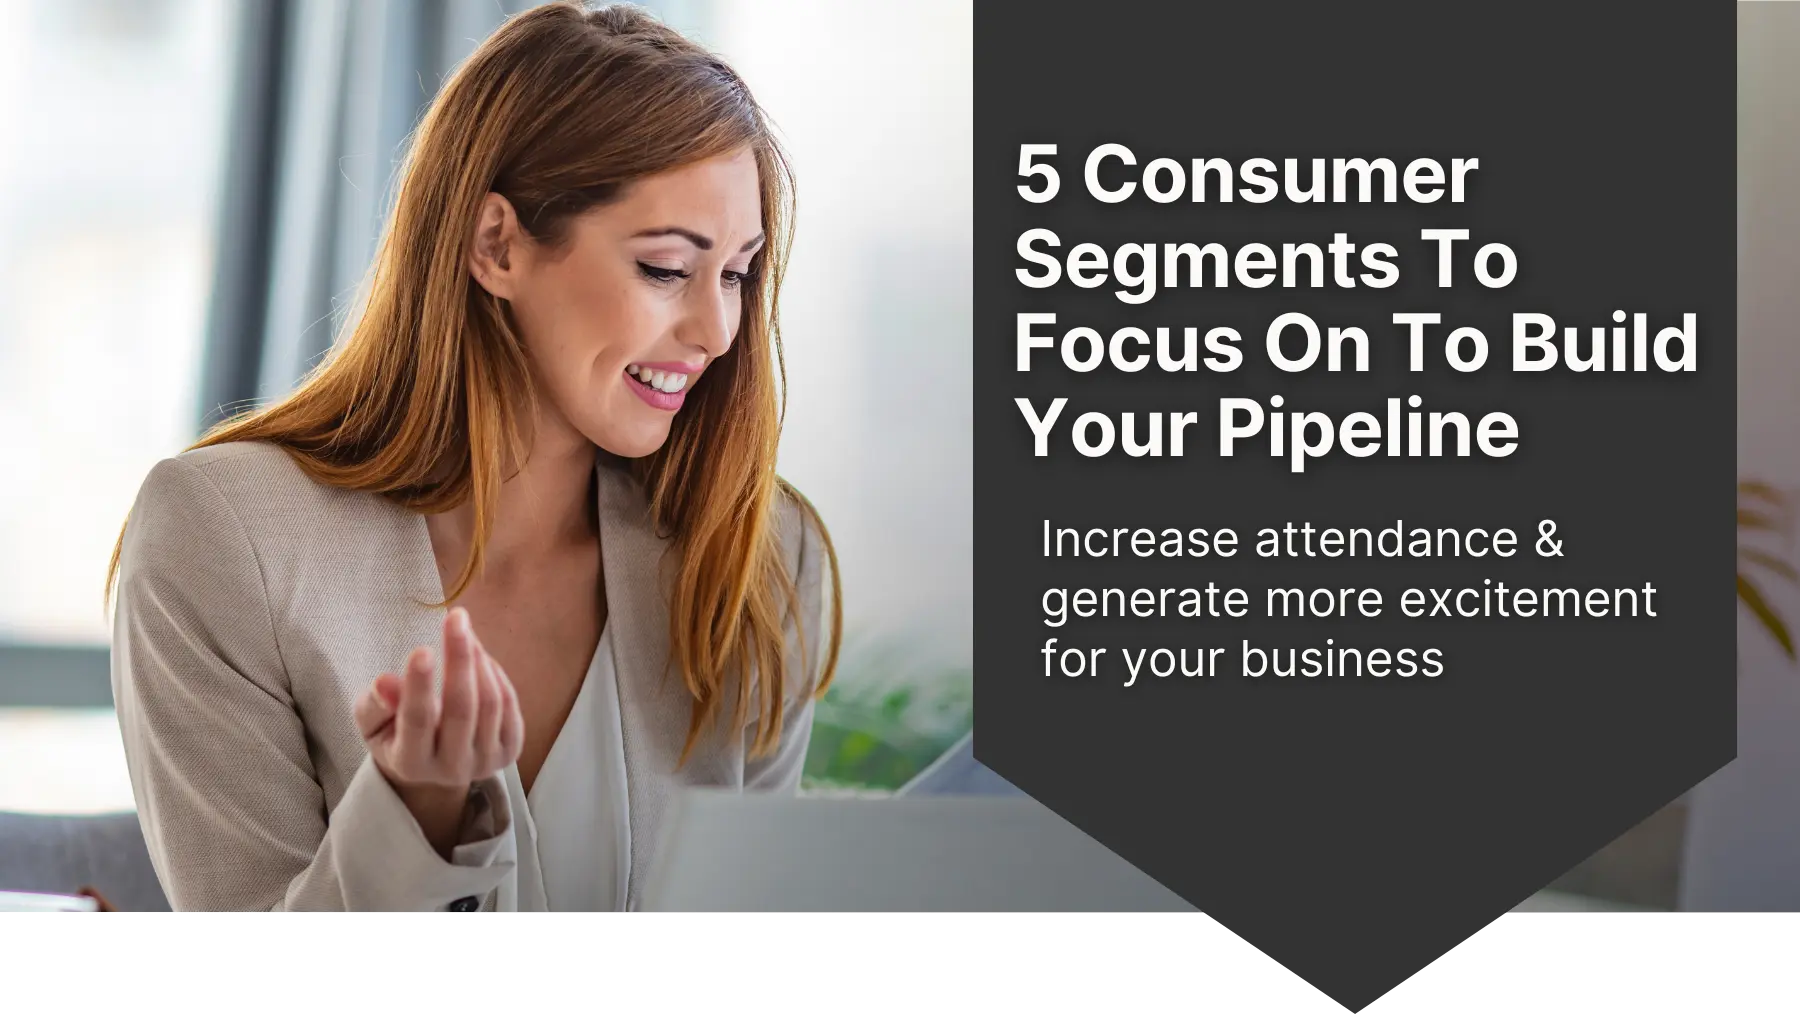 Realtor Partner Advice: 5 Consumer Segments to Focus On To Build Your Pipeline